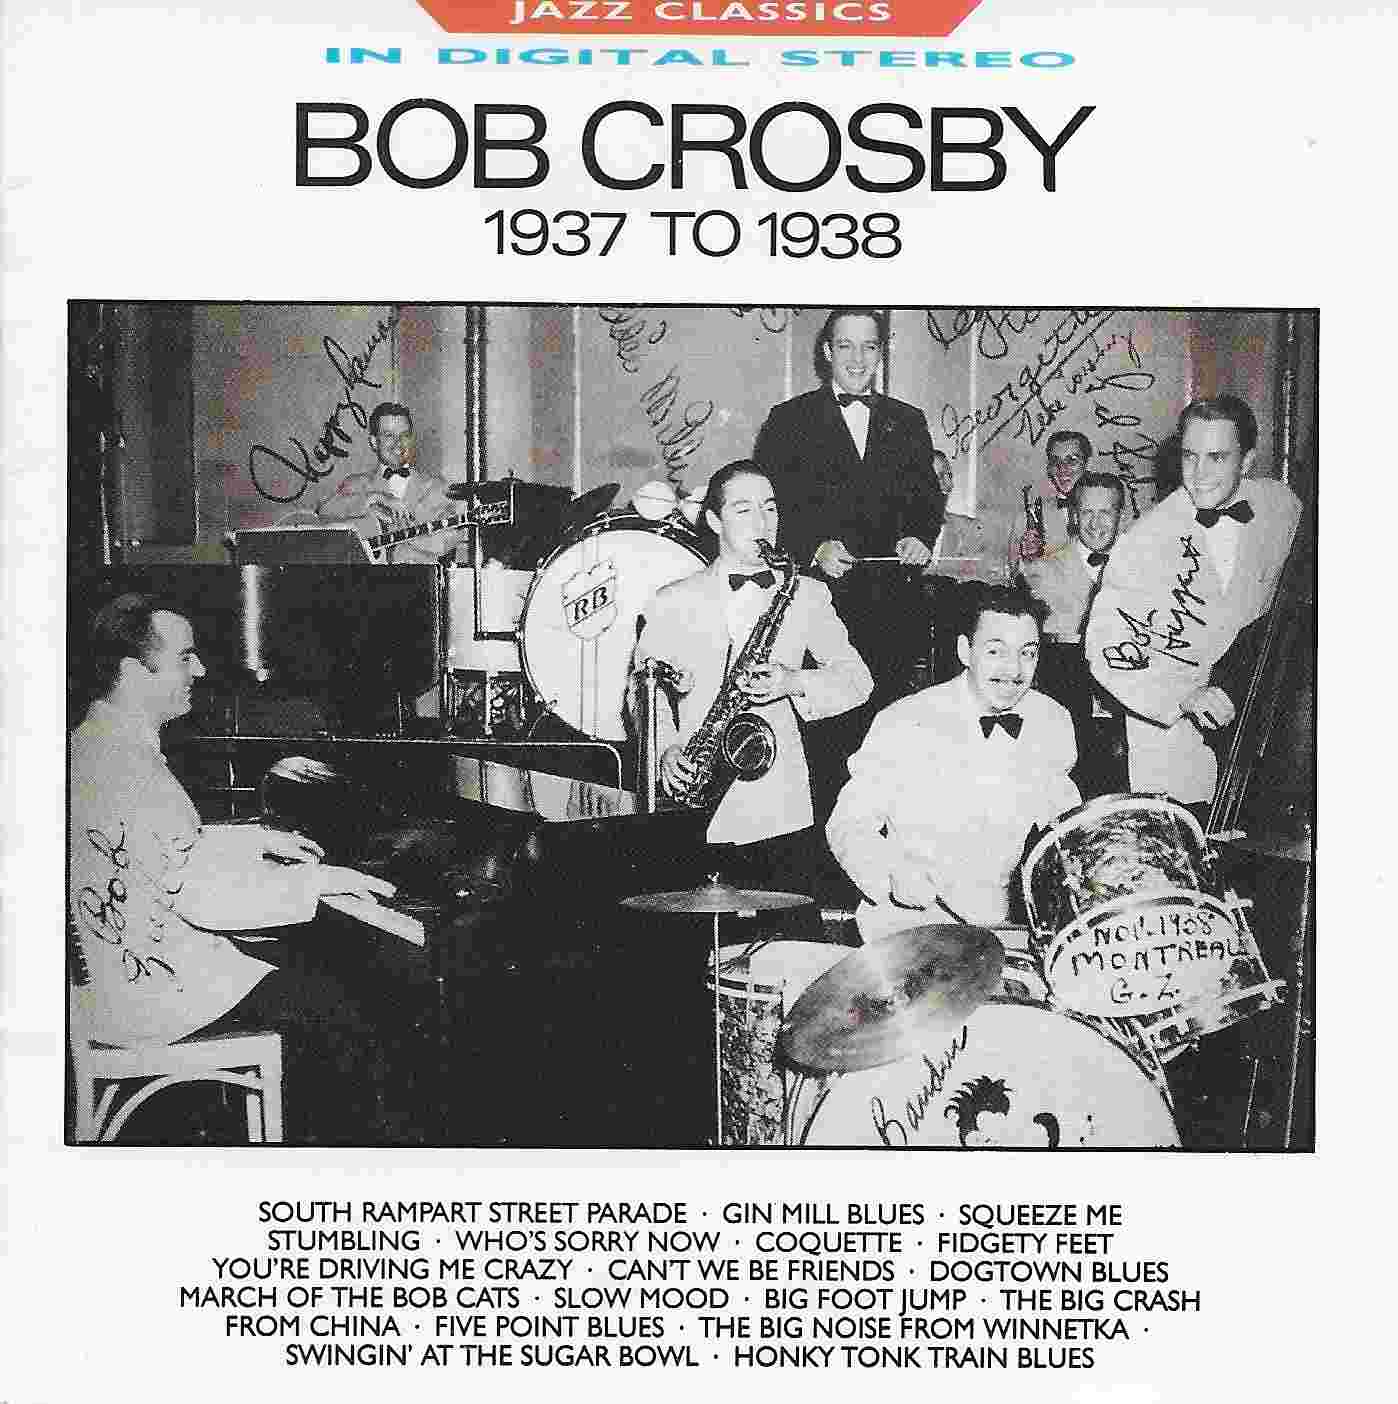 Picture of BBCCD688 Jazz classics - Bob Crosby by artist Bob Crosby from the BBC records and Tapes library